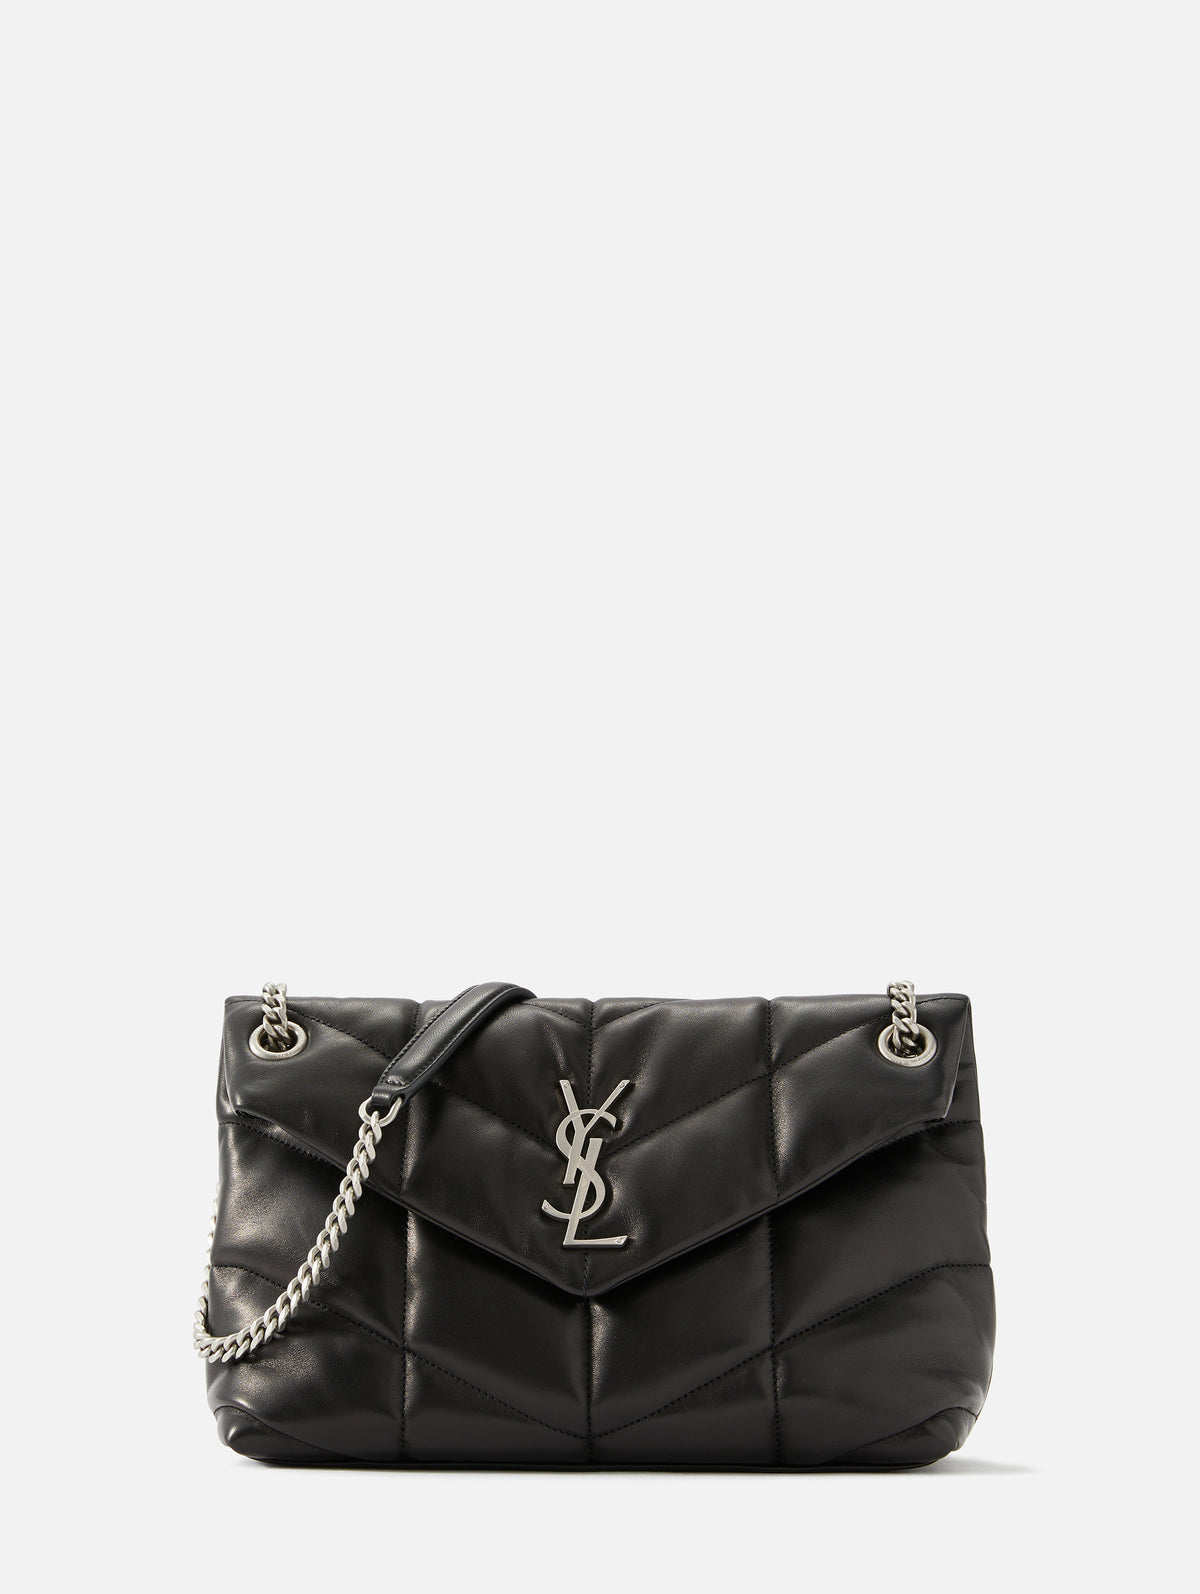 Saint Laurent Small Satchel Quilted Leather Cross-body Bag in Natural